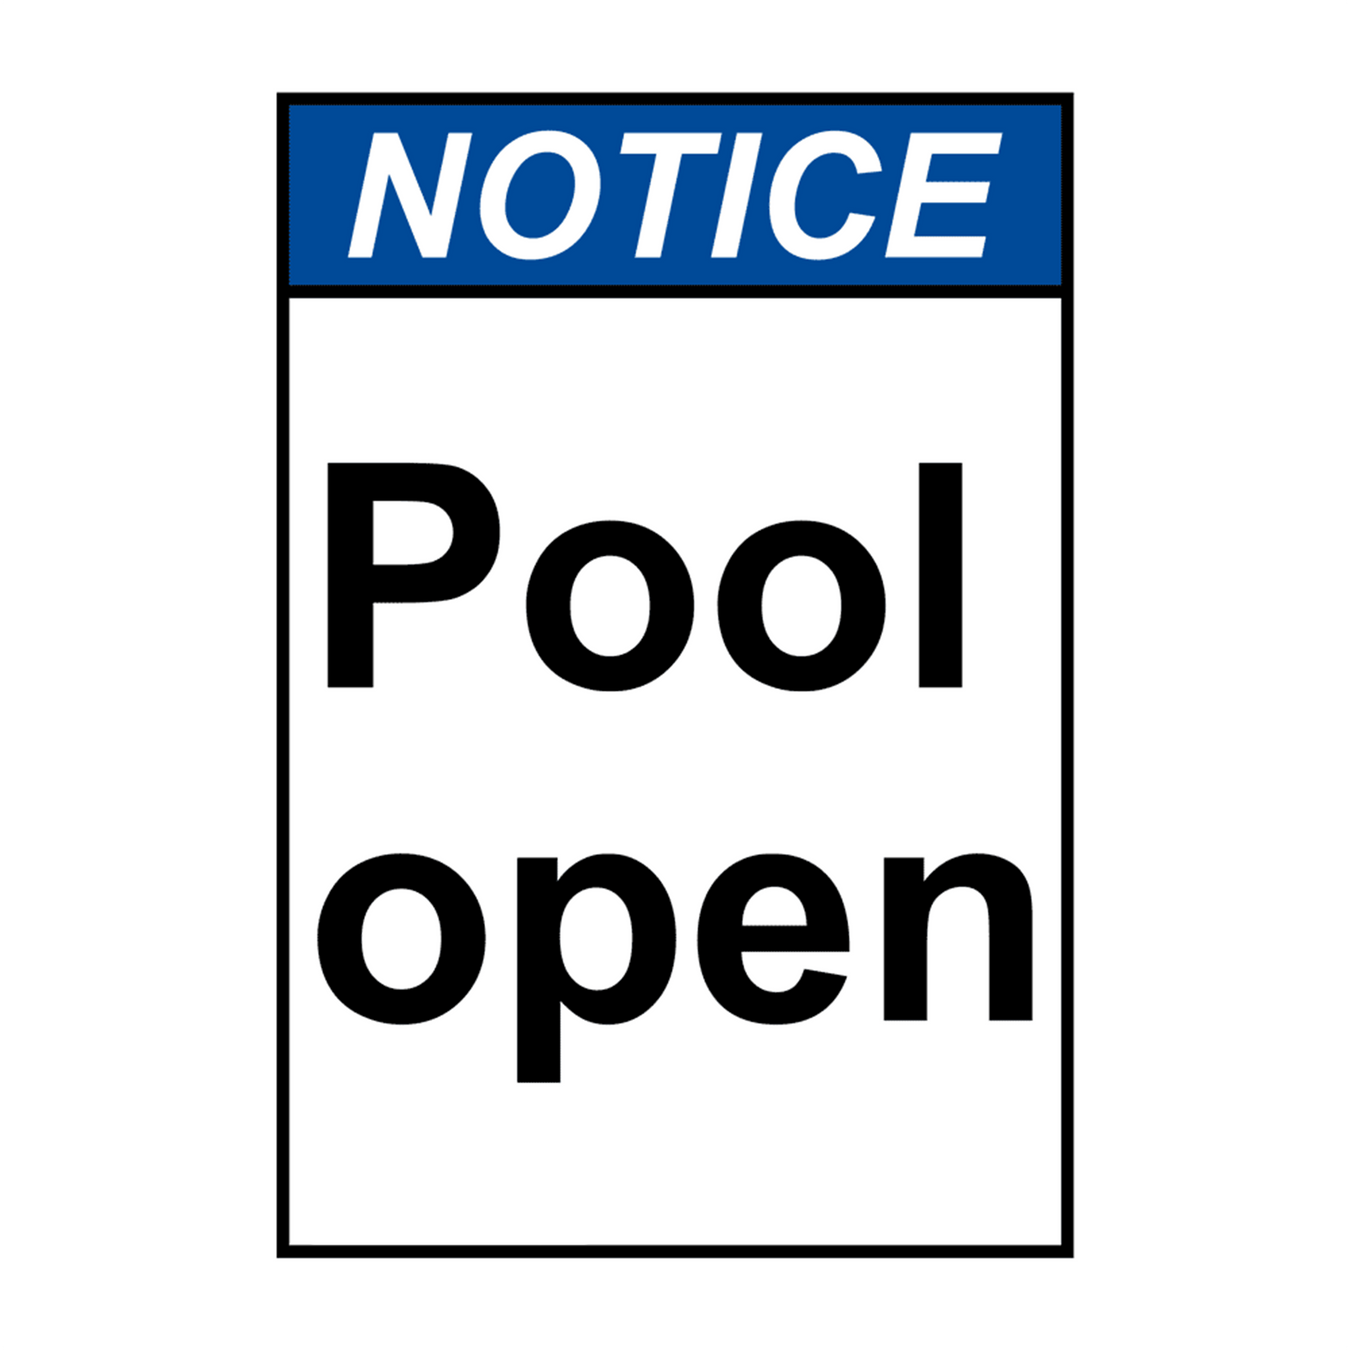 Water & Pool Safety